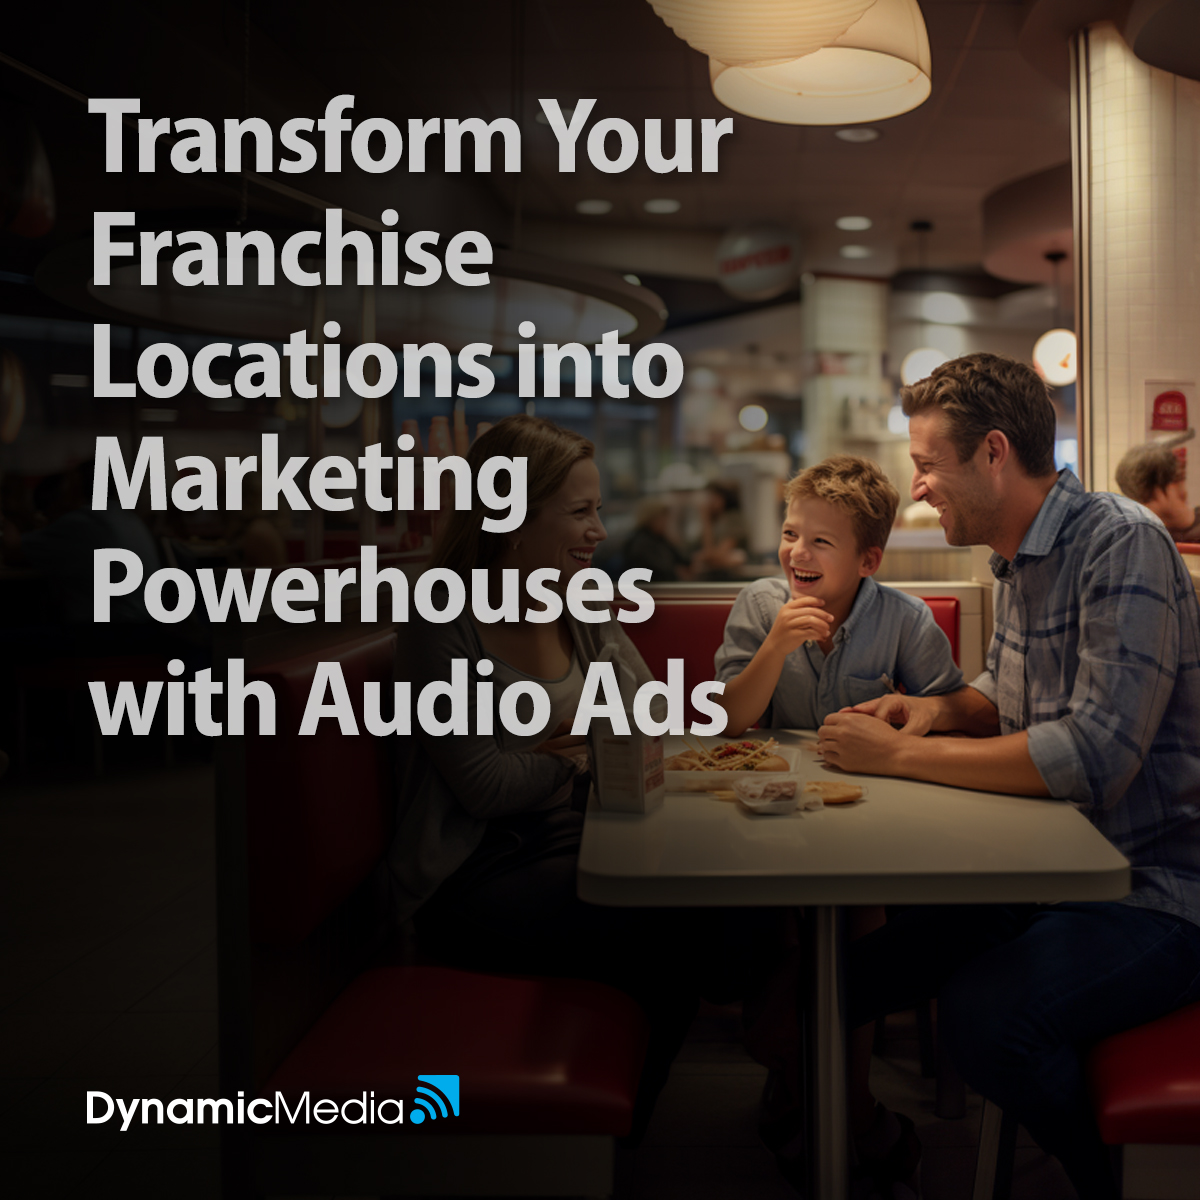 Maximize your speaker systems with tailored audio ads and boost your product promotions. Our clients have witnessed a 25% increase! What's your in-location marketing story? Let's optimize your assets together. #AudioMarketing #marketing #franchise #ads 
zurl.co/Y802